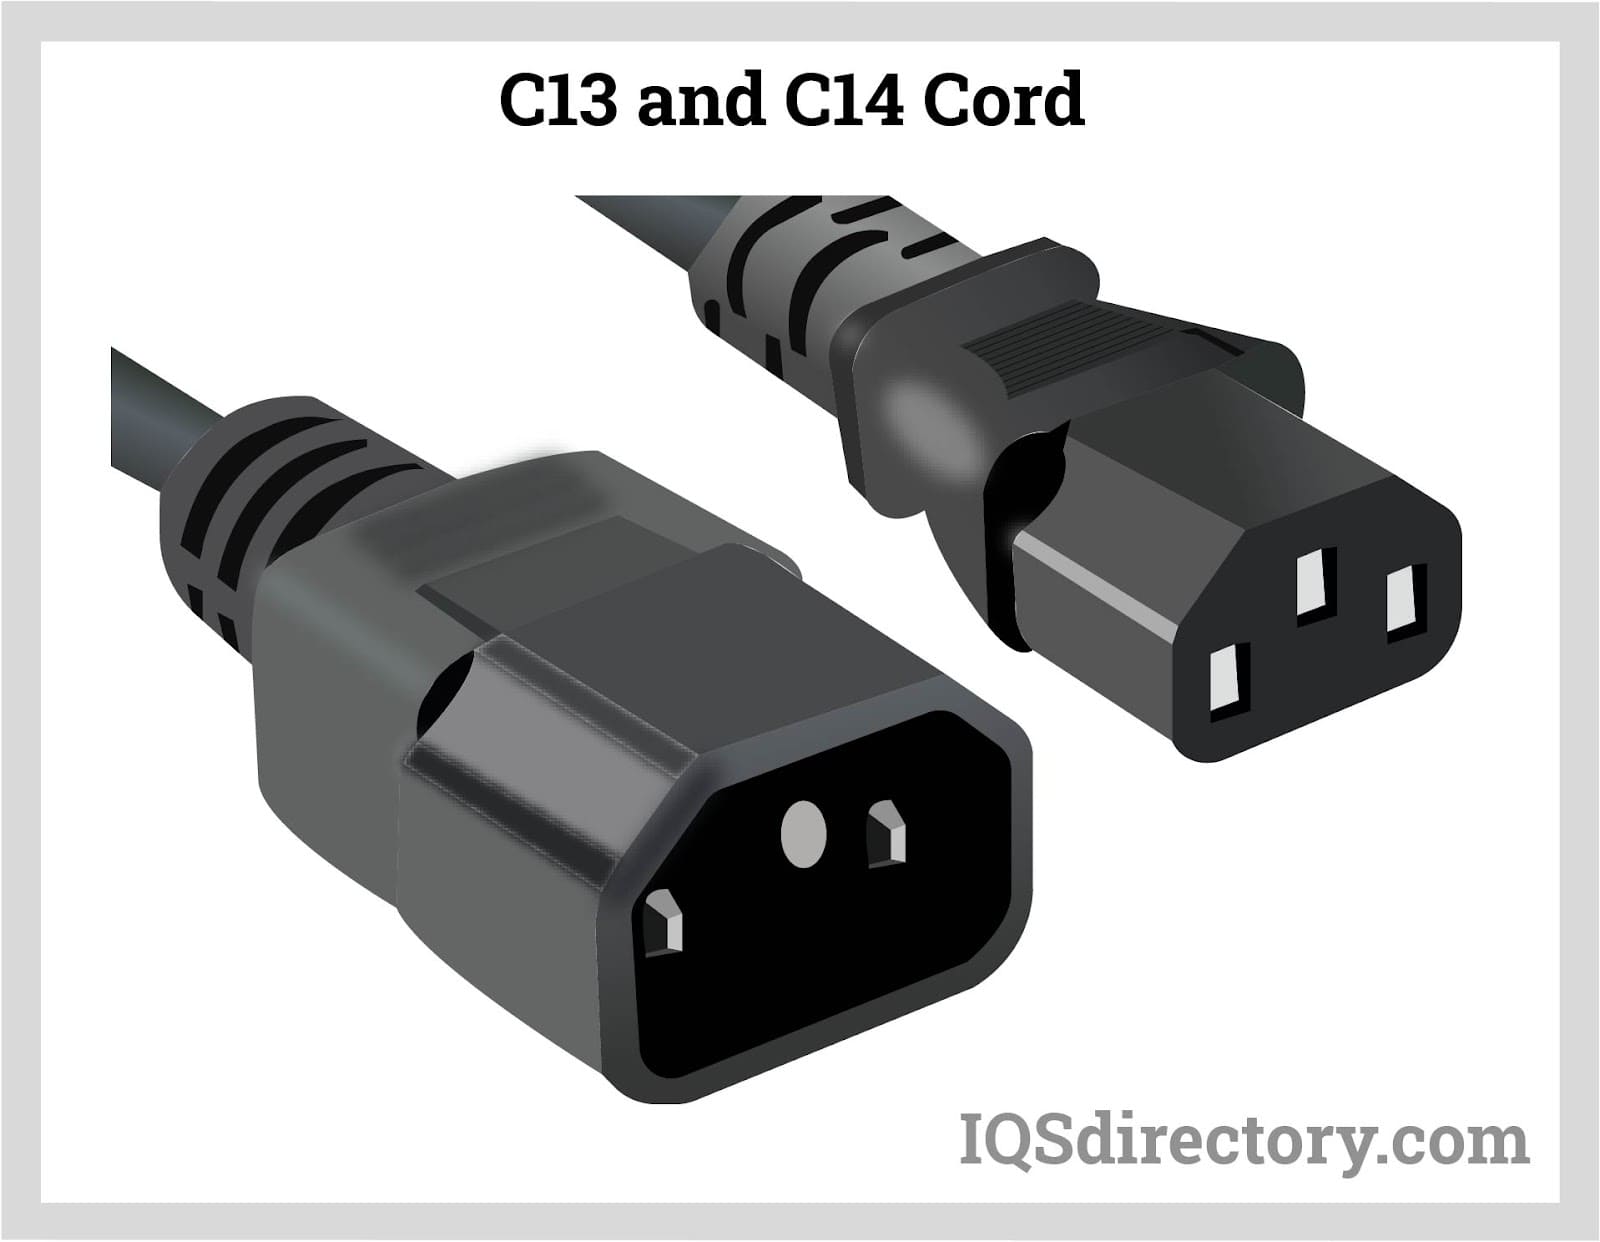 C13 and C14 Cord